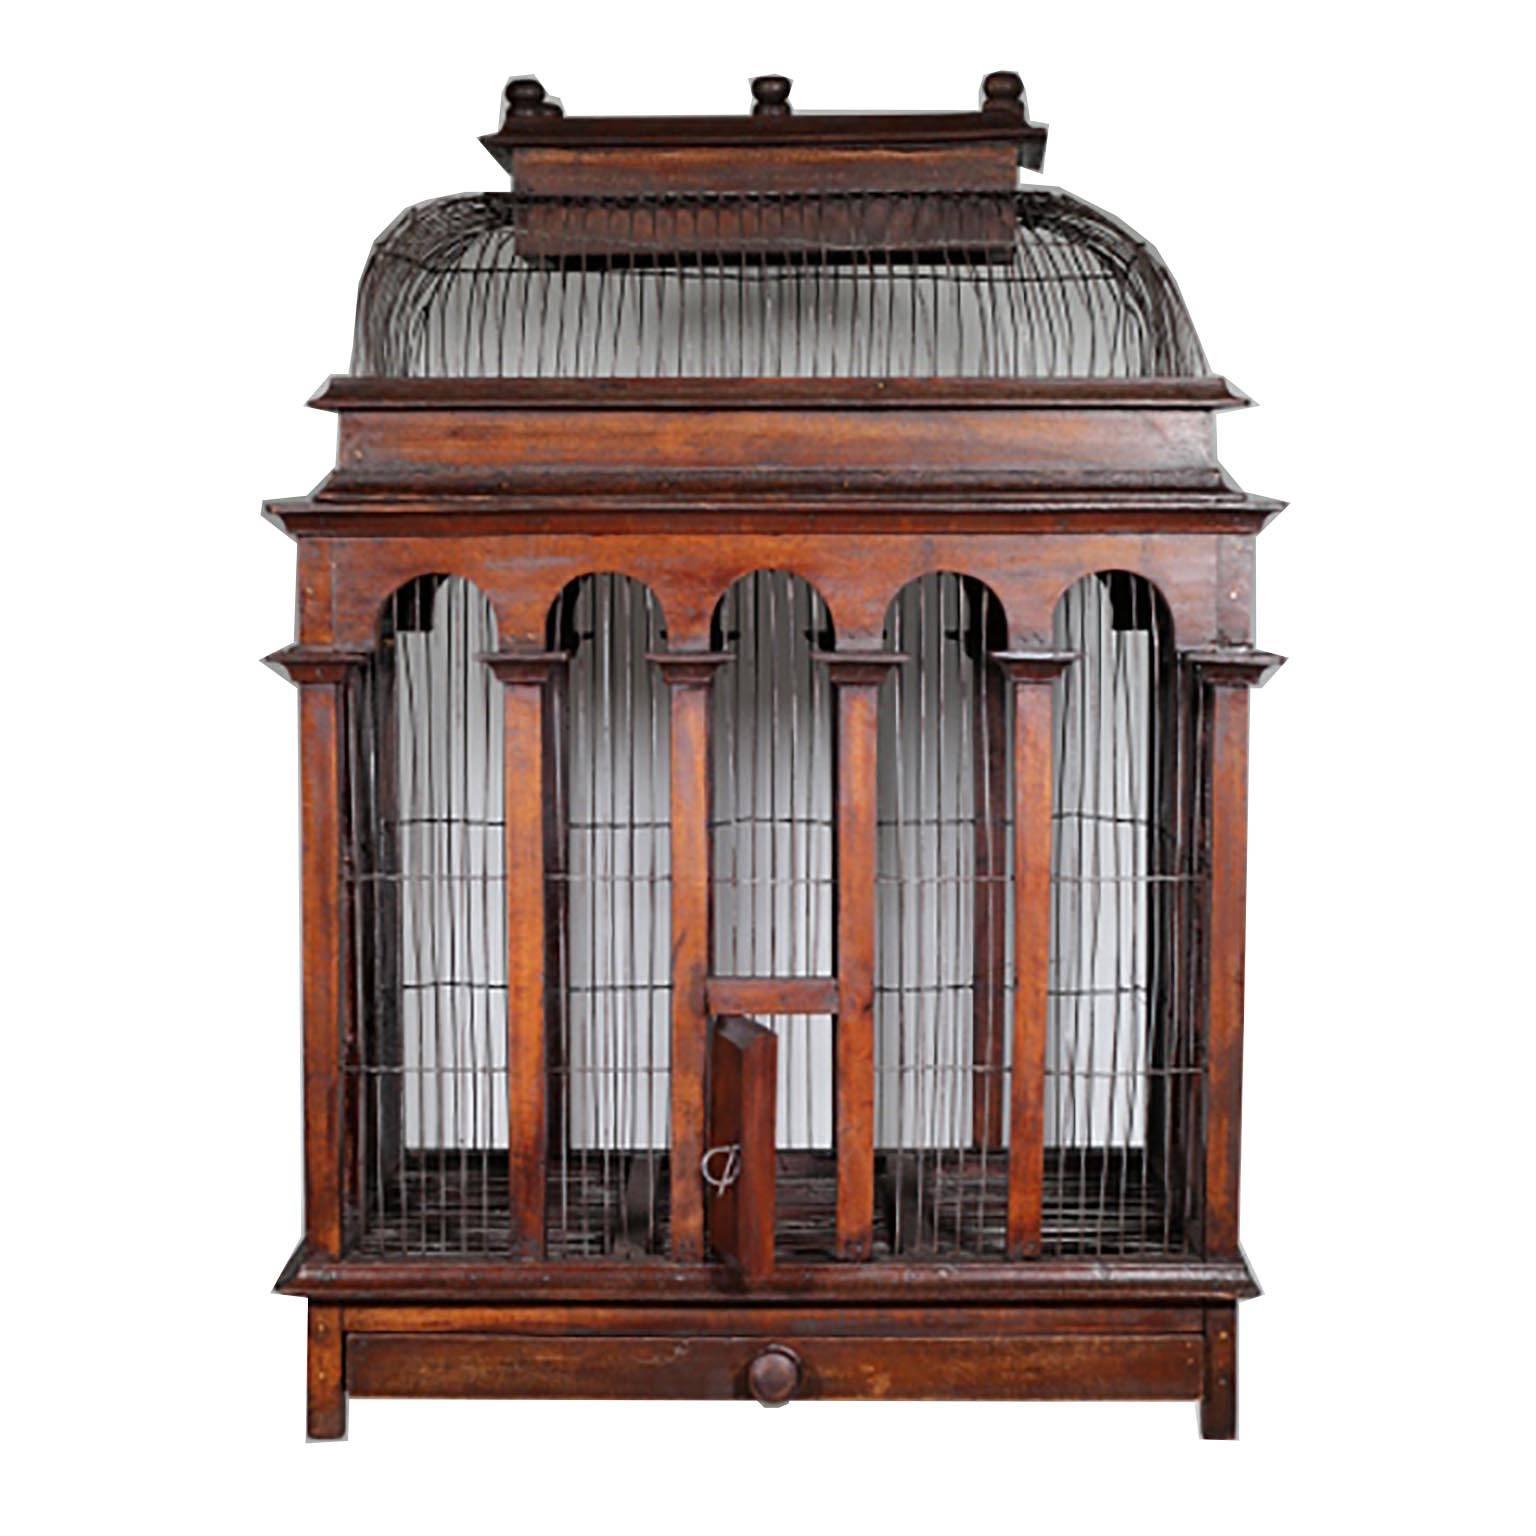 Wood and wire birdcage with front door, slide out bottom tray and removable top wire dome.